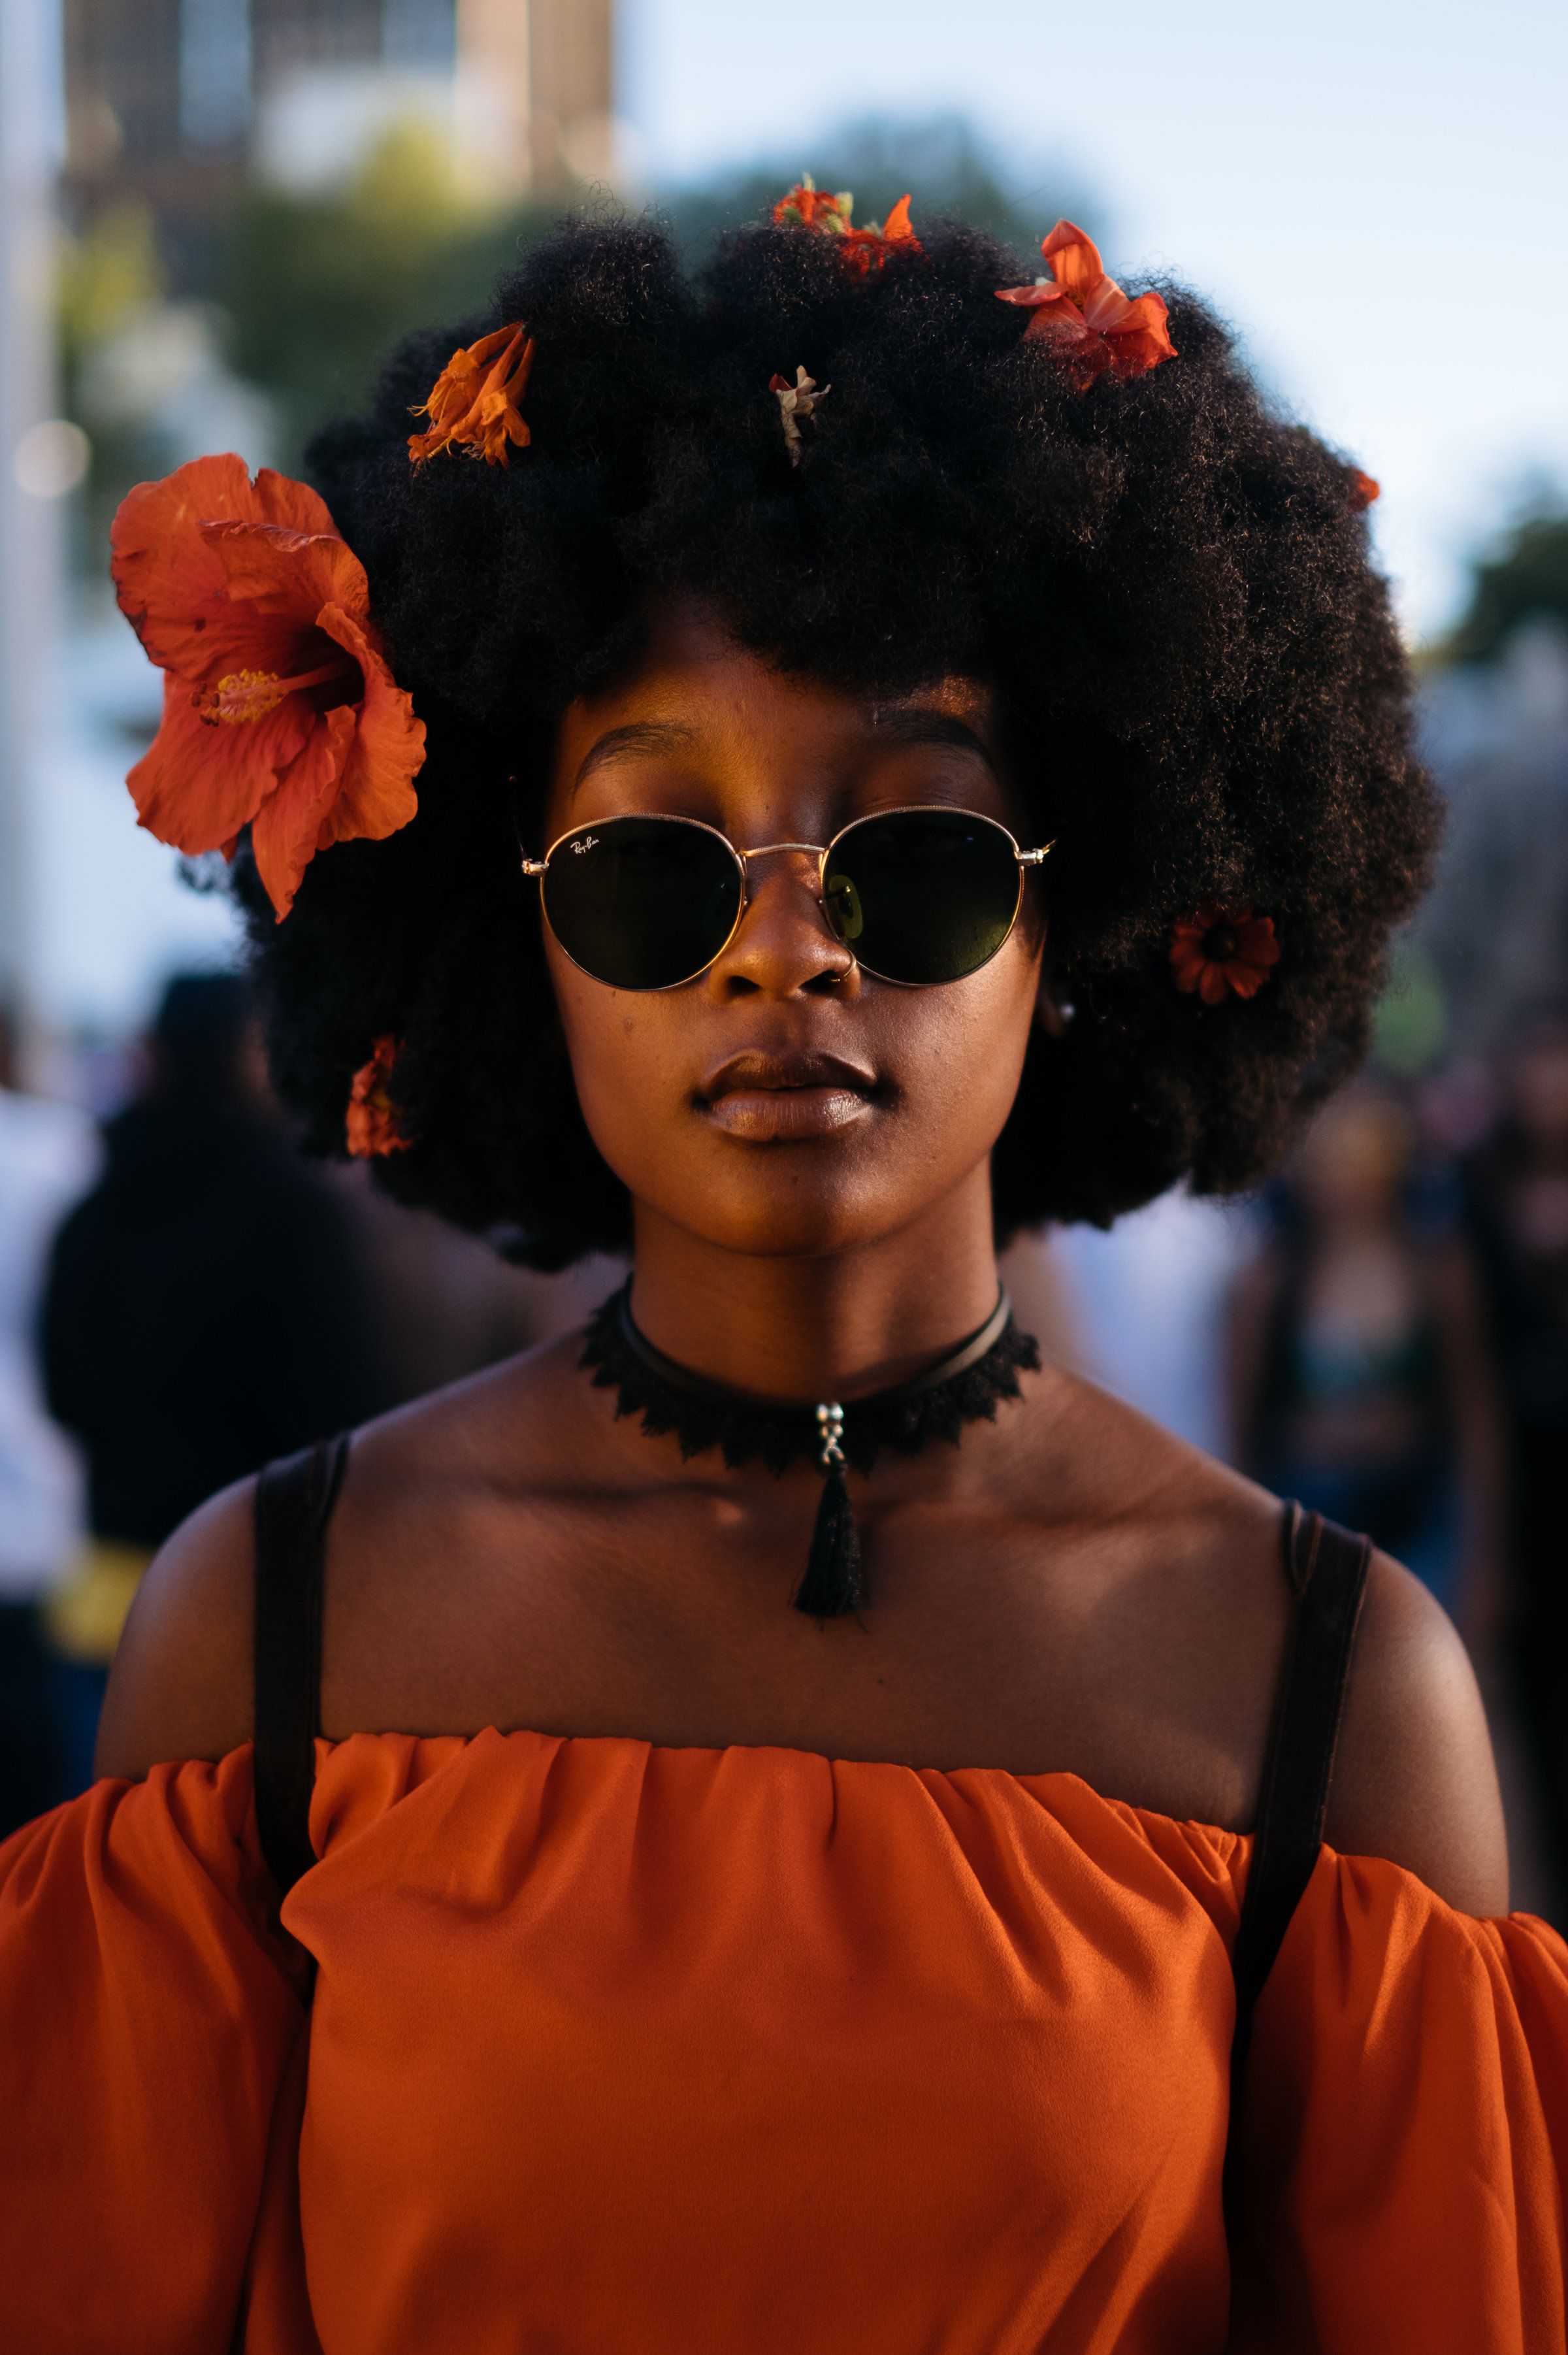 Tumi Tsele, 19, attended Afropunk Joburg. "We have plenty of festivals about our heritage, but I've never seen so many young people celebrating blackness at this scale." Image by Melissa Bunni Elian. South Africa, 2017.